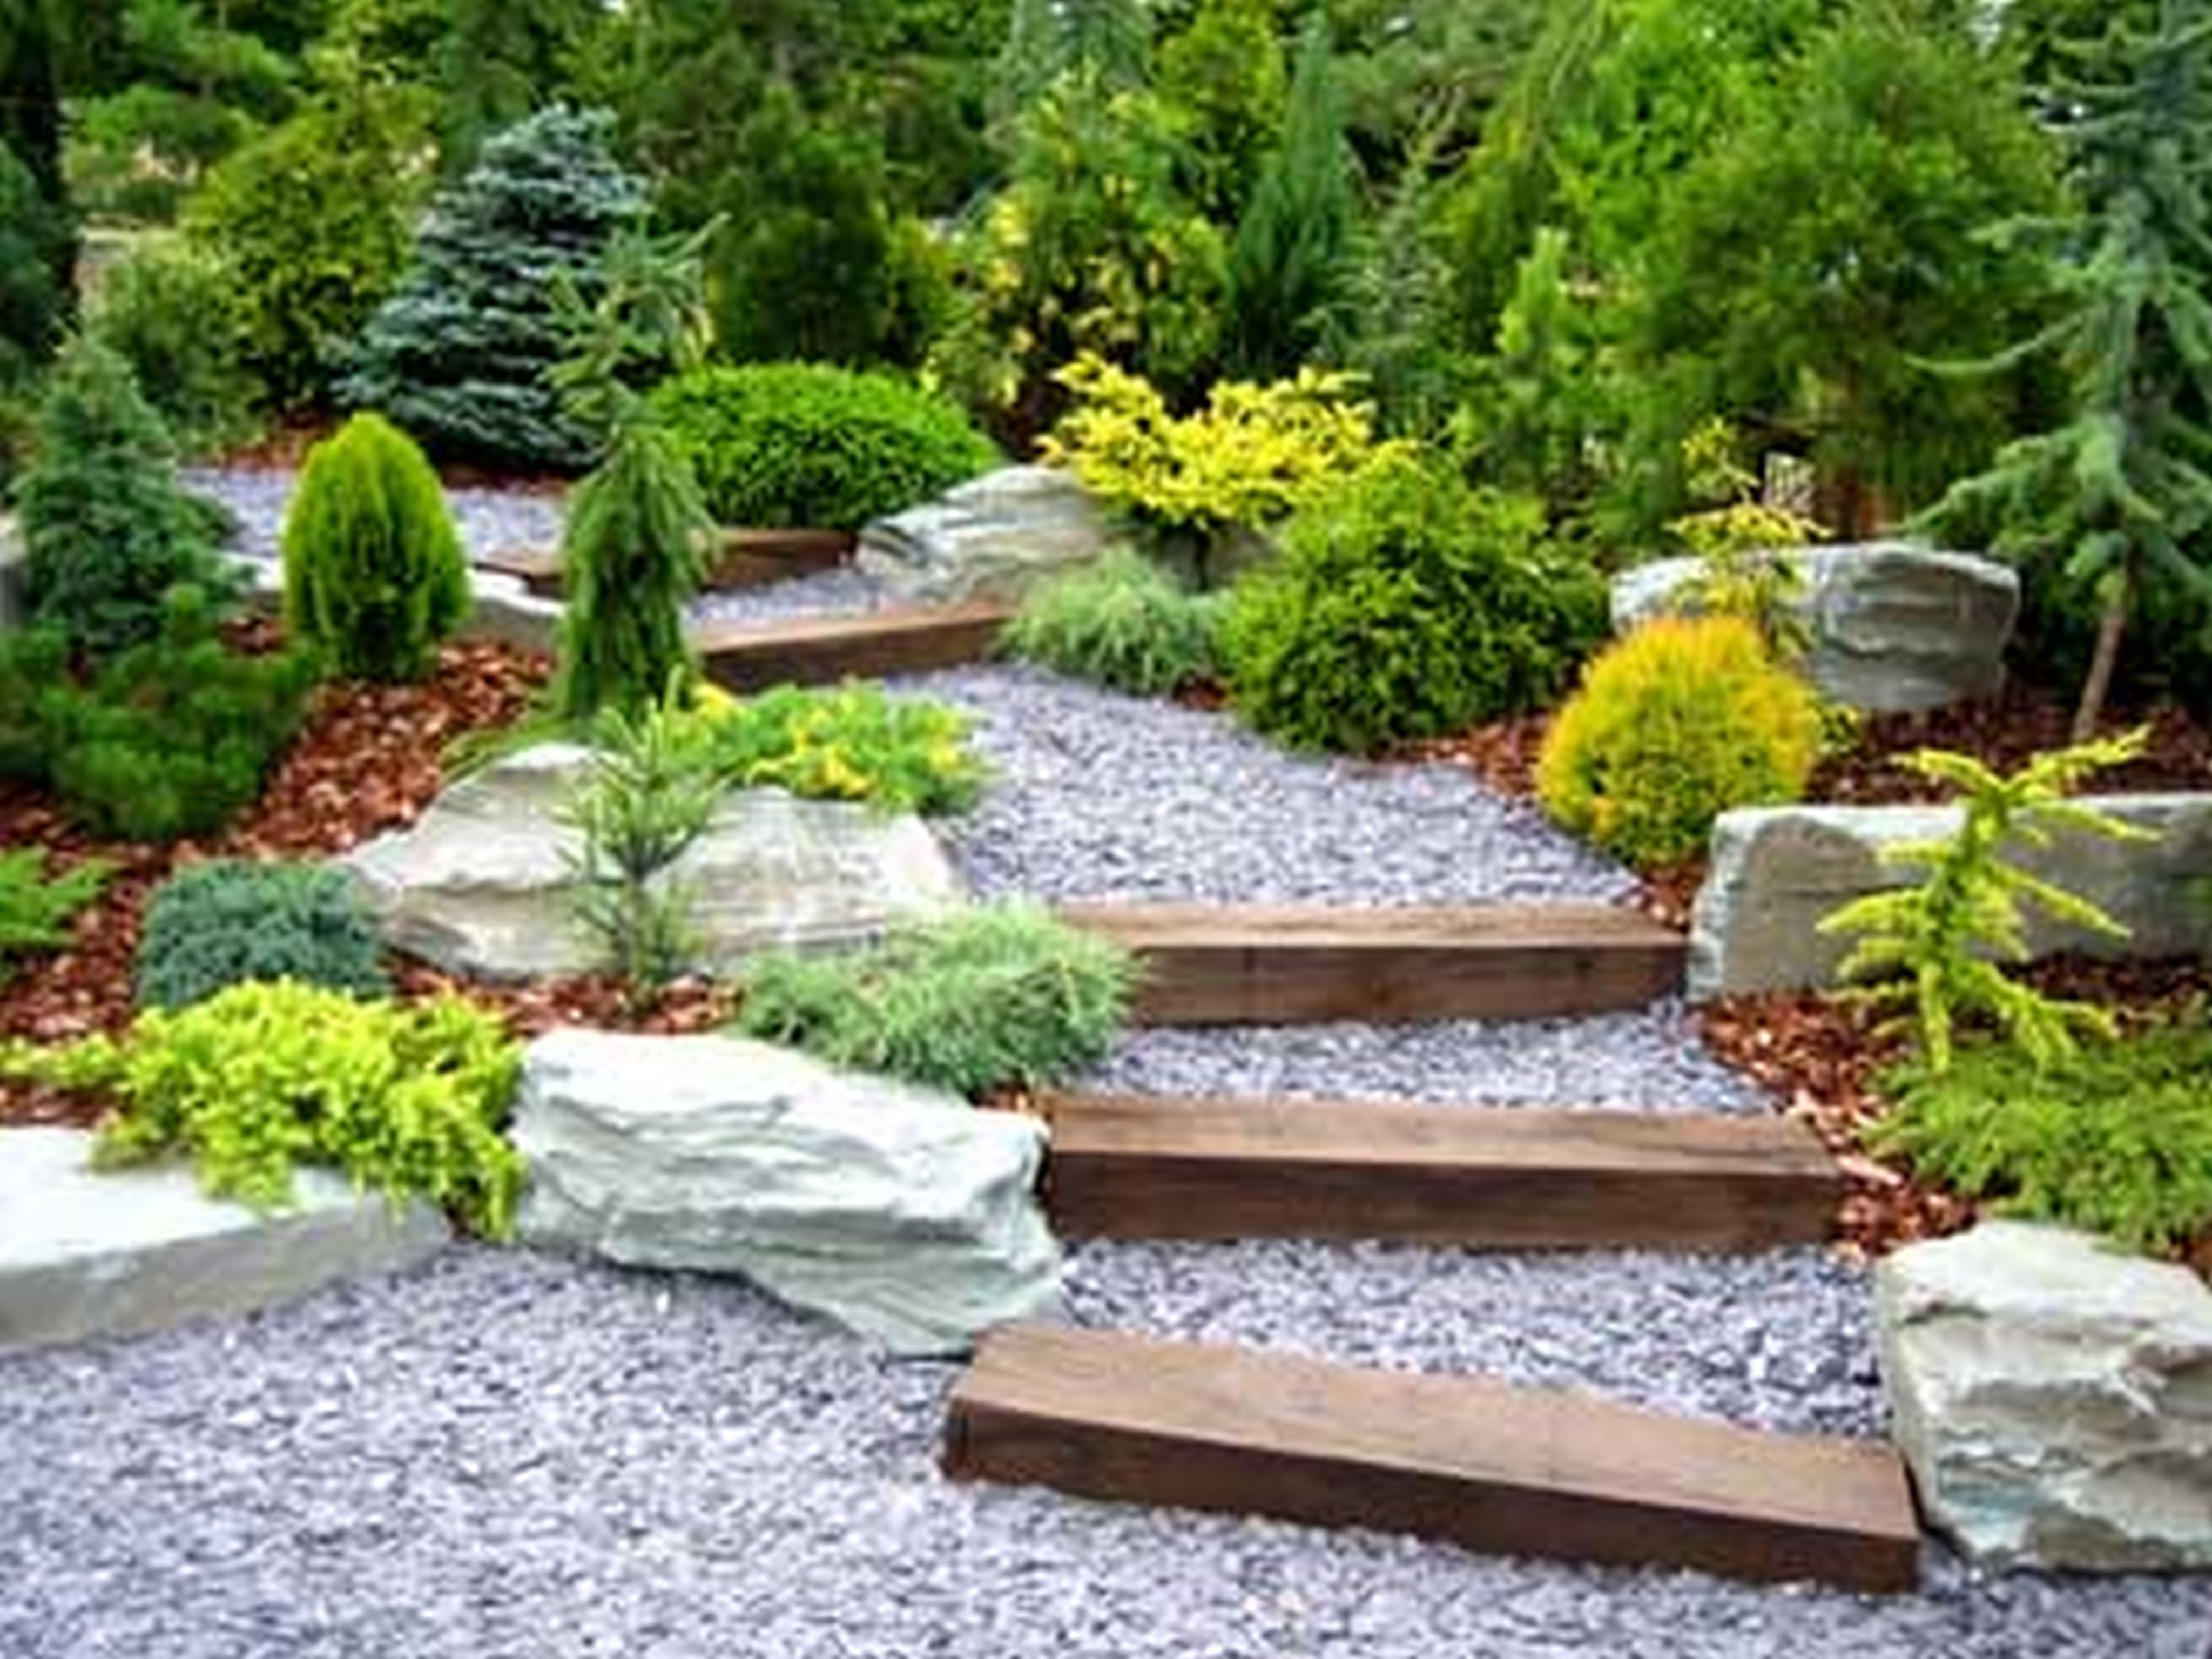 10 Fashionable Diy Landscaping Ideas On A Budget diy landscaping design ideas on a budget youtube 2022